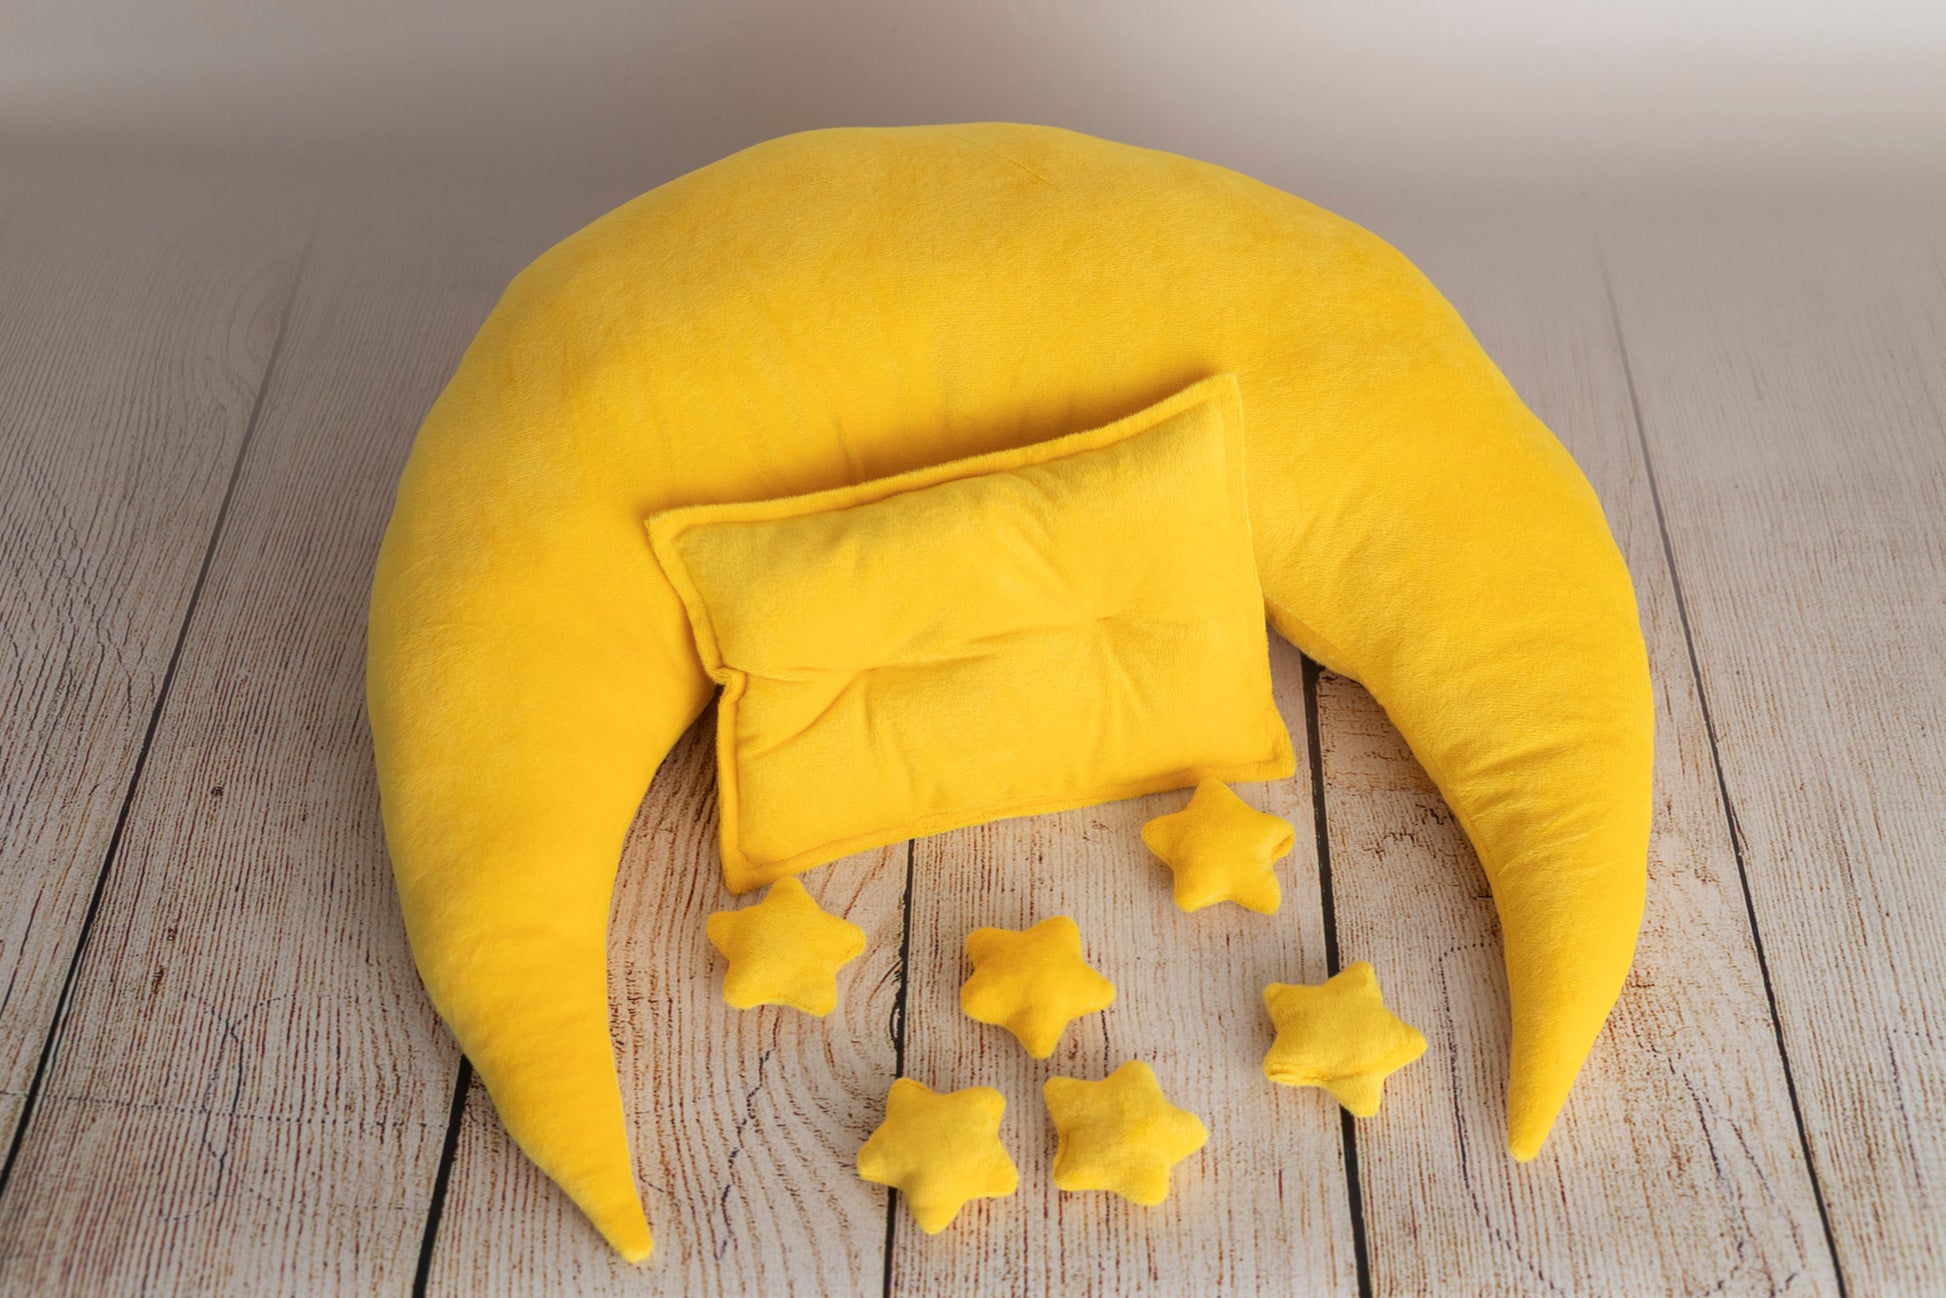 Dazzling, handmade Moon Pillow set for newborn photography. This is a must-have item for every newborn photographer.